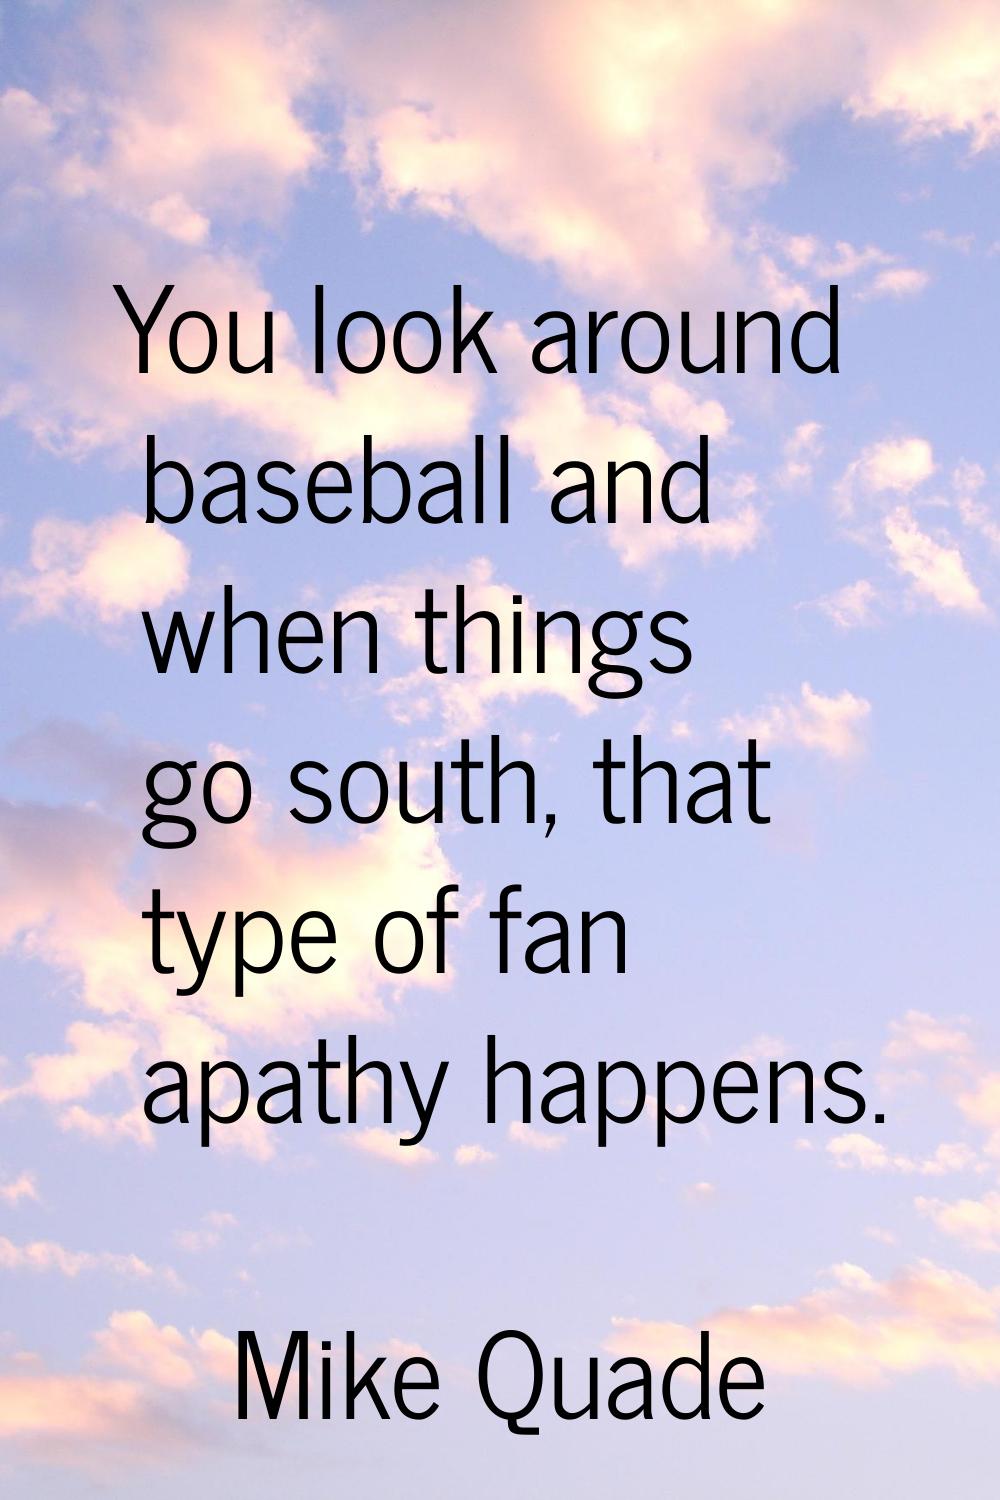 You look around baseball and when things go south, that type of fan apathy happens.